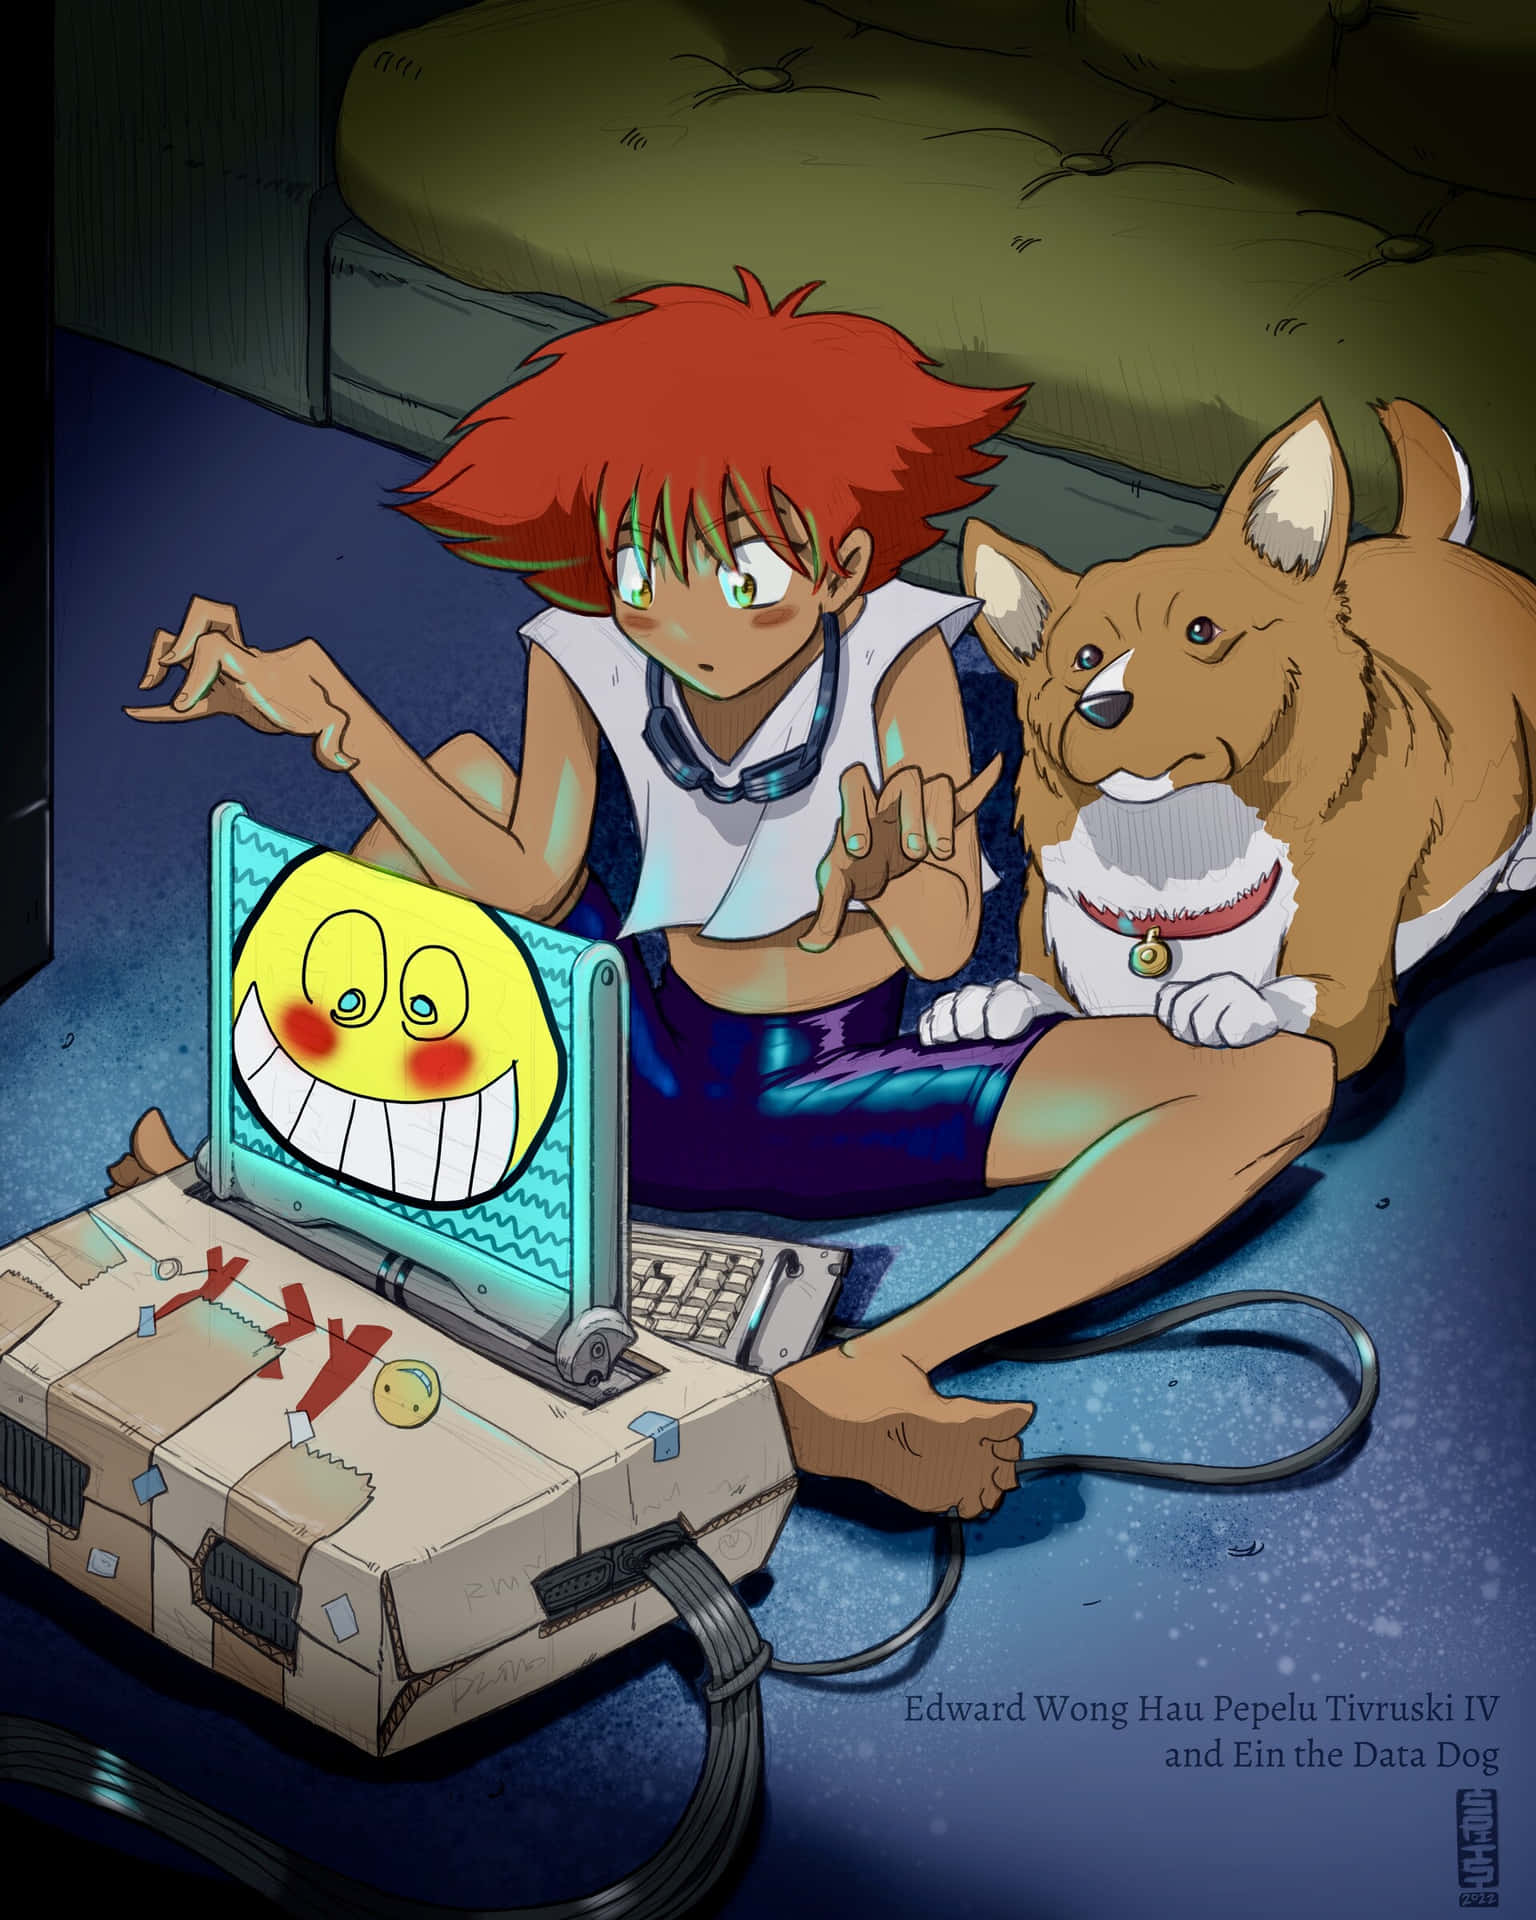 Ein, the adorable data dog from Cowboy Bebop, gazing curiously into the distance Wallpaper